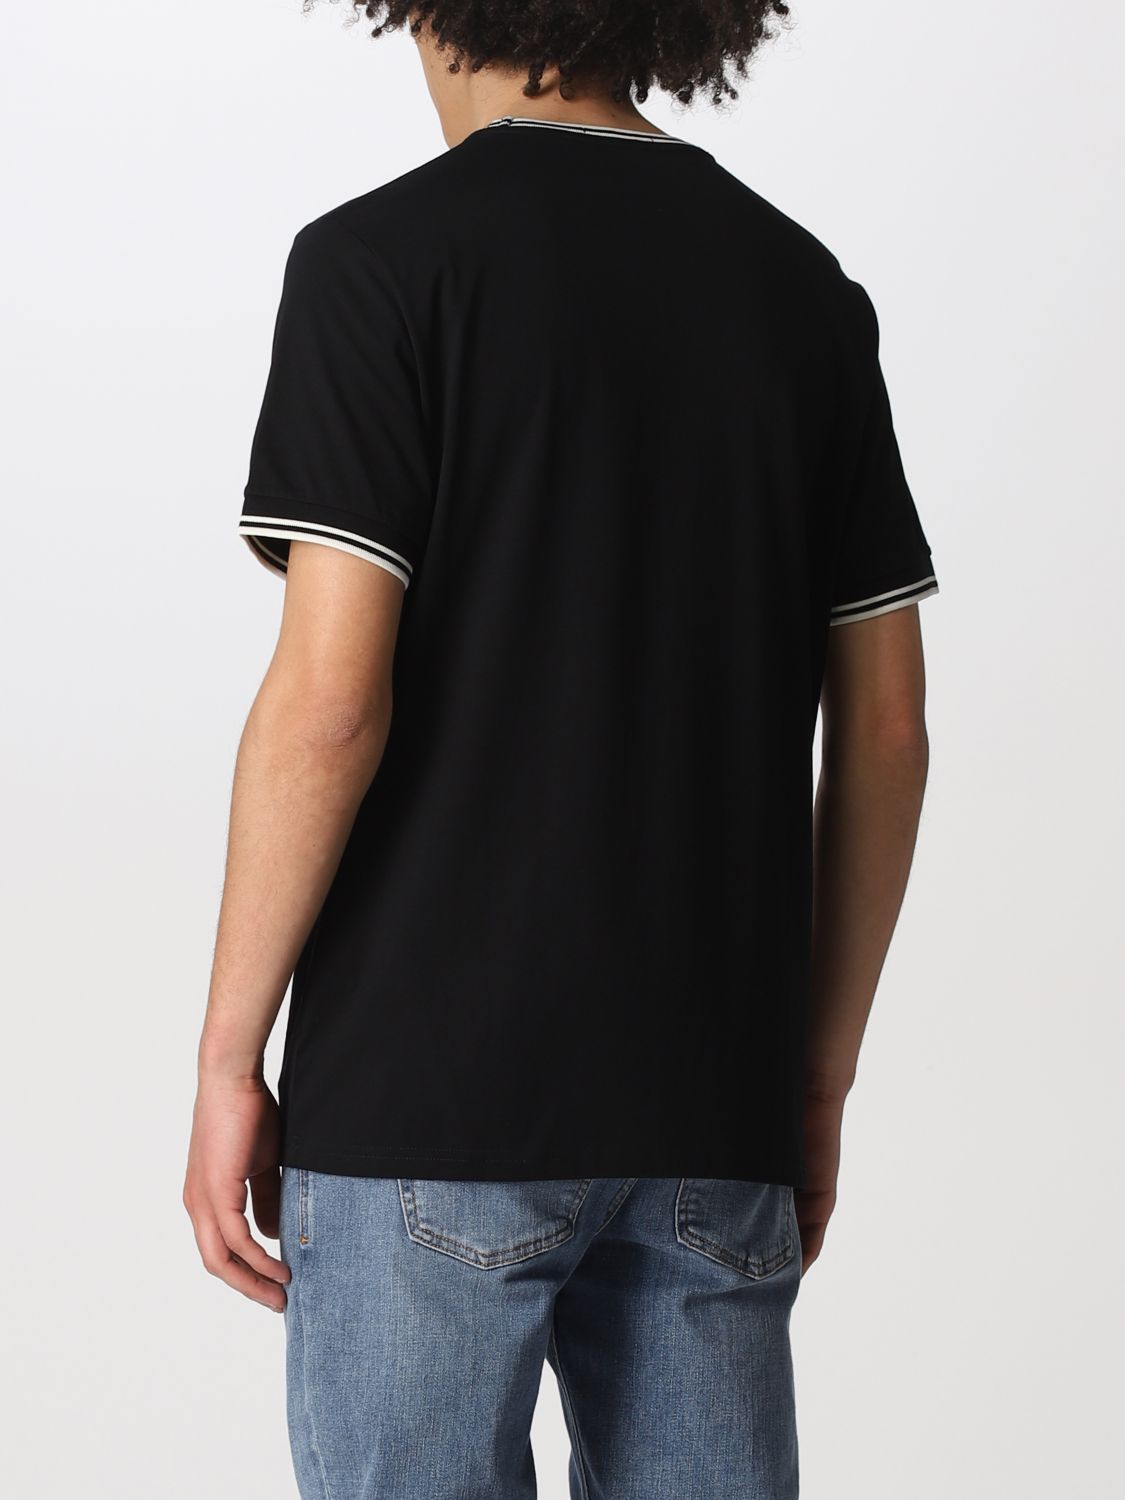 Tシャツ Fred Perry: Tシャツ メンズ Fred Perry ブラック 2